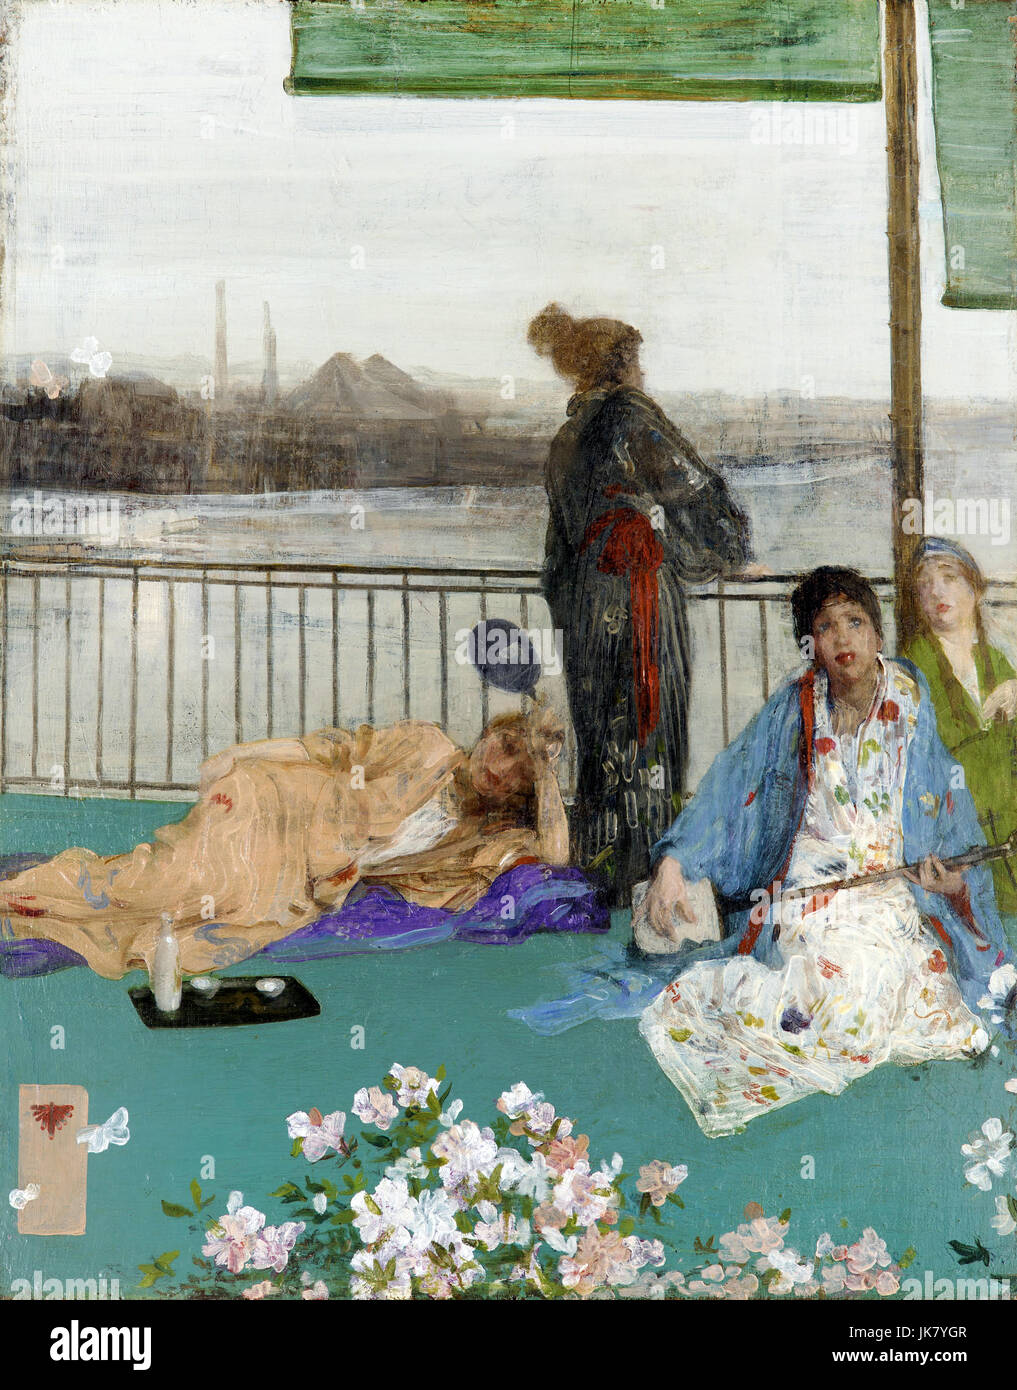 James Abbott McNeill Whistler, Variations in Flesh Colour and Green - The Balcony 1864-1879 Oil on wood panel. Freer Gallery of Art, Washington, D.C., Stock Photo